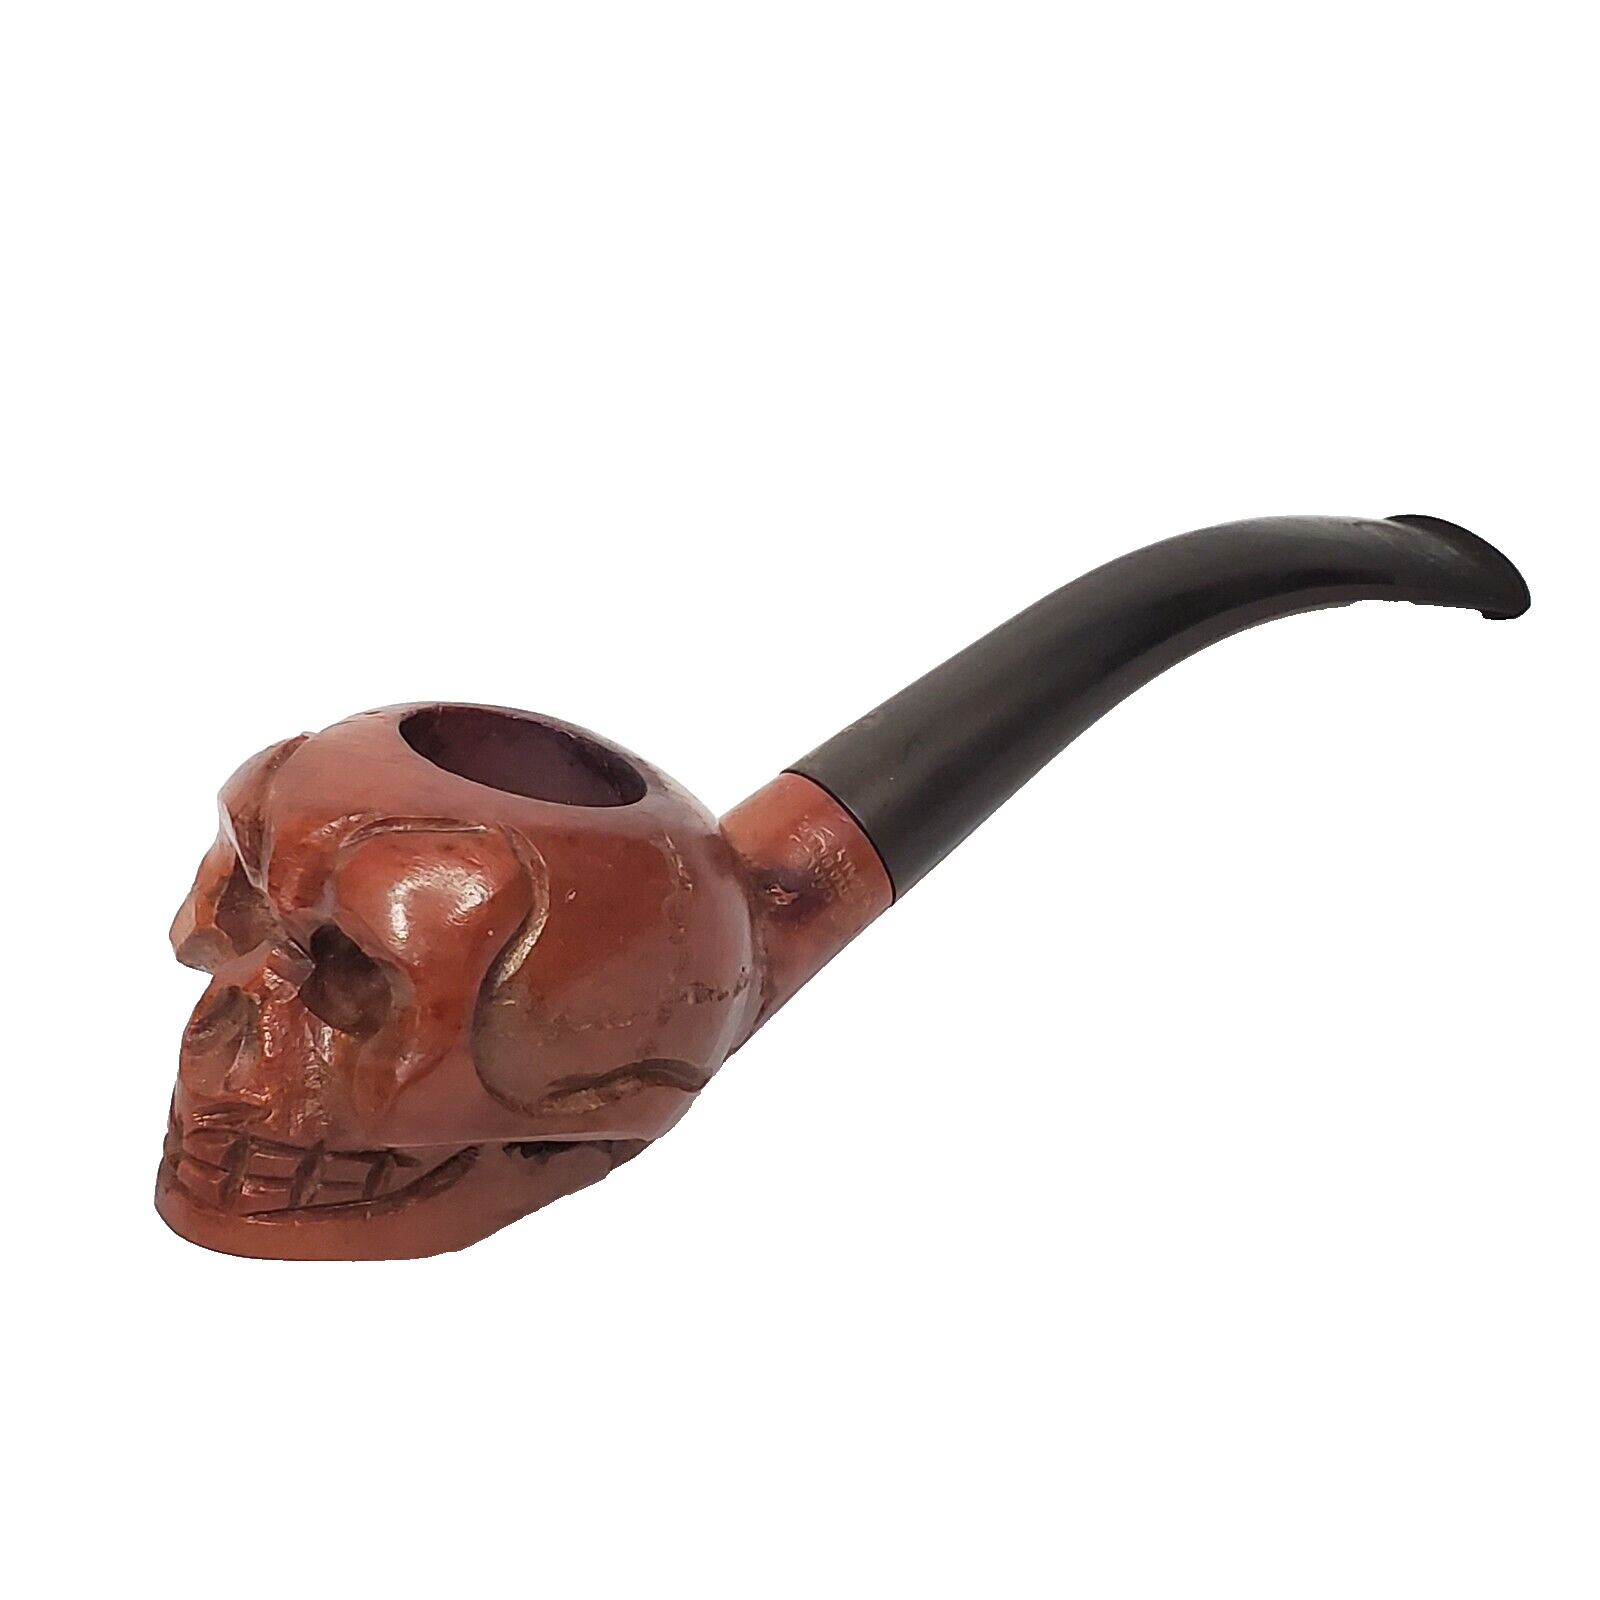 Vintage Goth Skull Smoking Tobacco Pipe Briar Wood Italy Imported Hand Carved